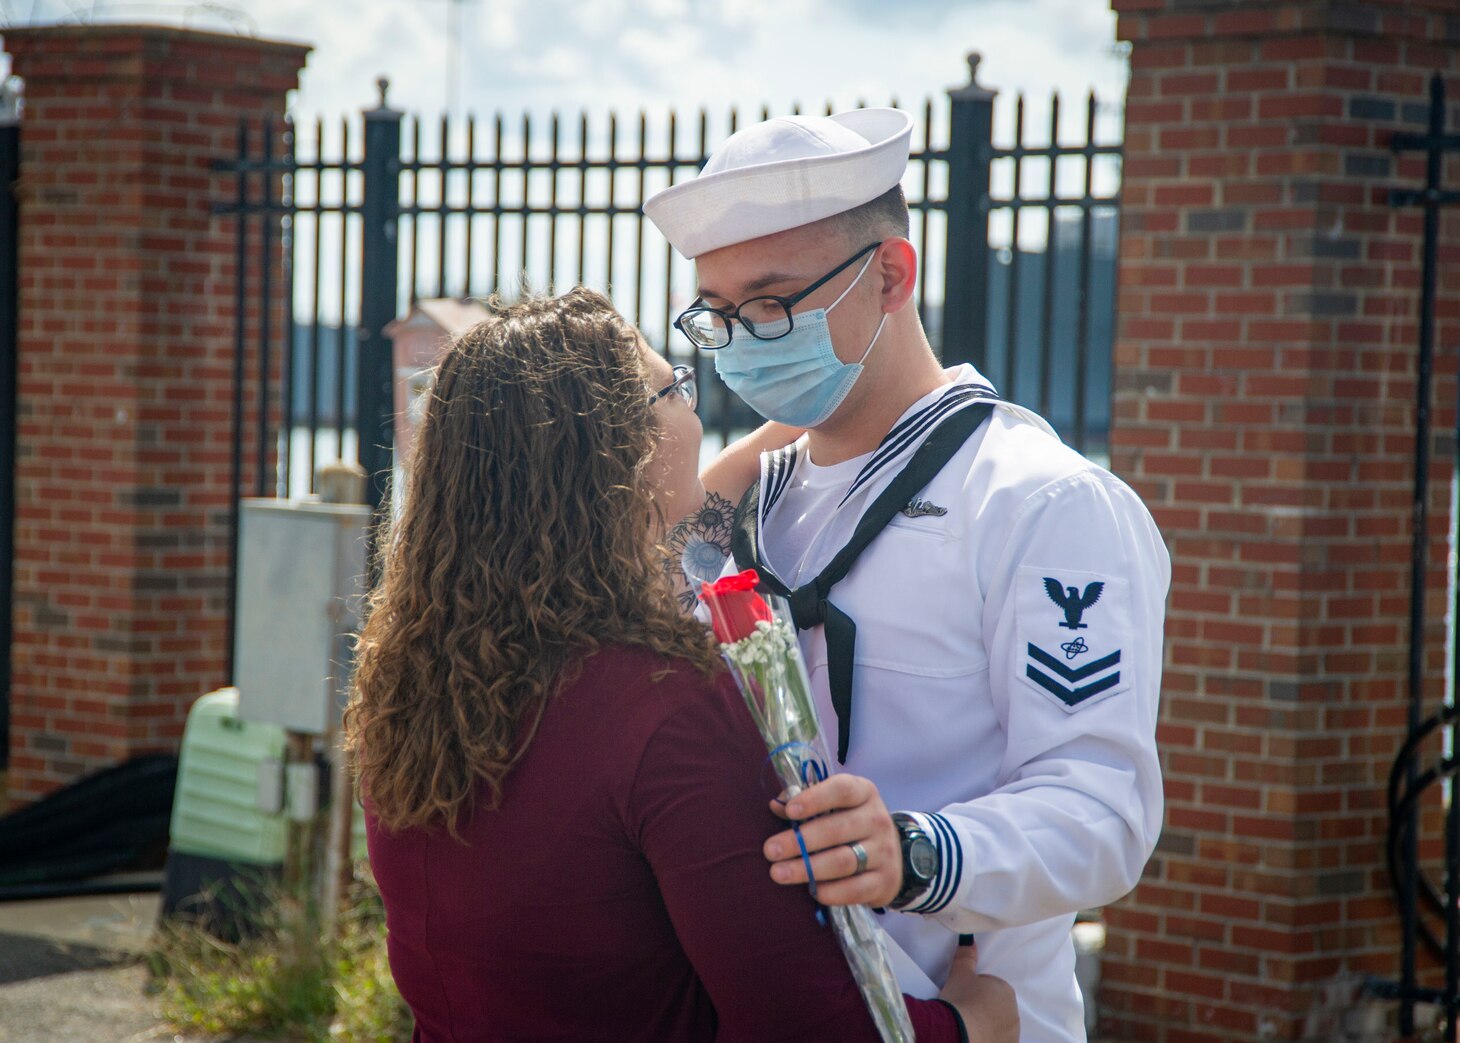 Electronics Technician (Nuclear Power) 2nd Class Gavin Ledesma, assigned to the Virginia-Class fast-attack submarine USS New Mexico (SSN 779), embraces his significant other during the boat’s homecoming at Naval Station Norfolk, Sept. 15, 2021.